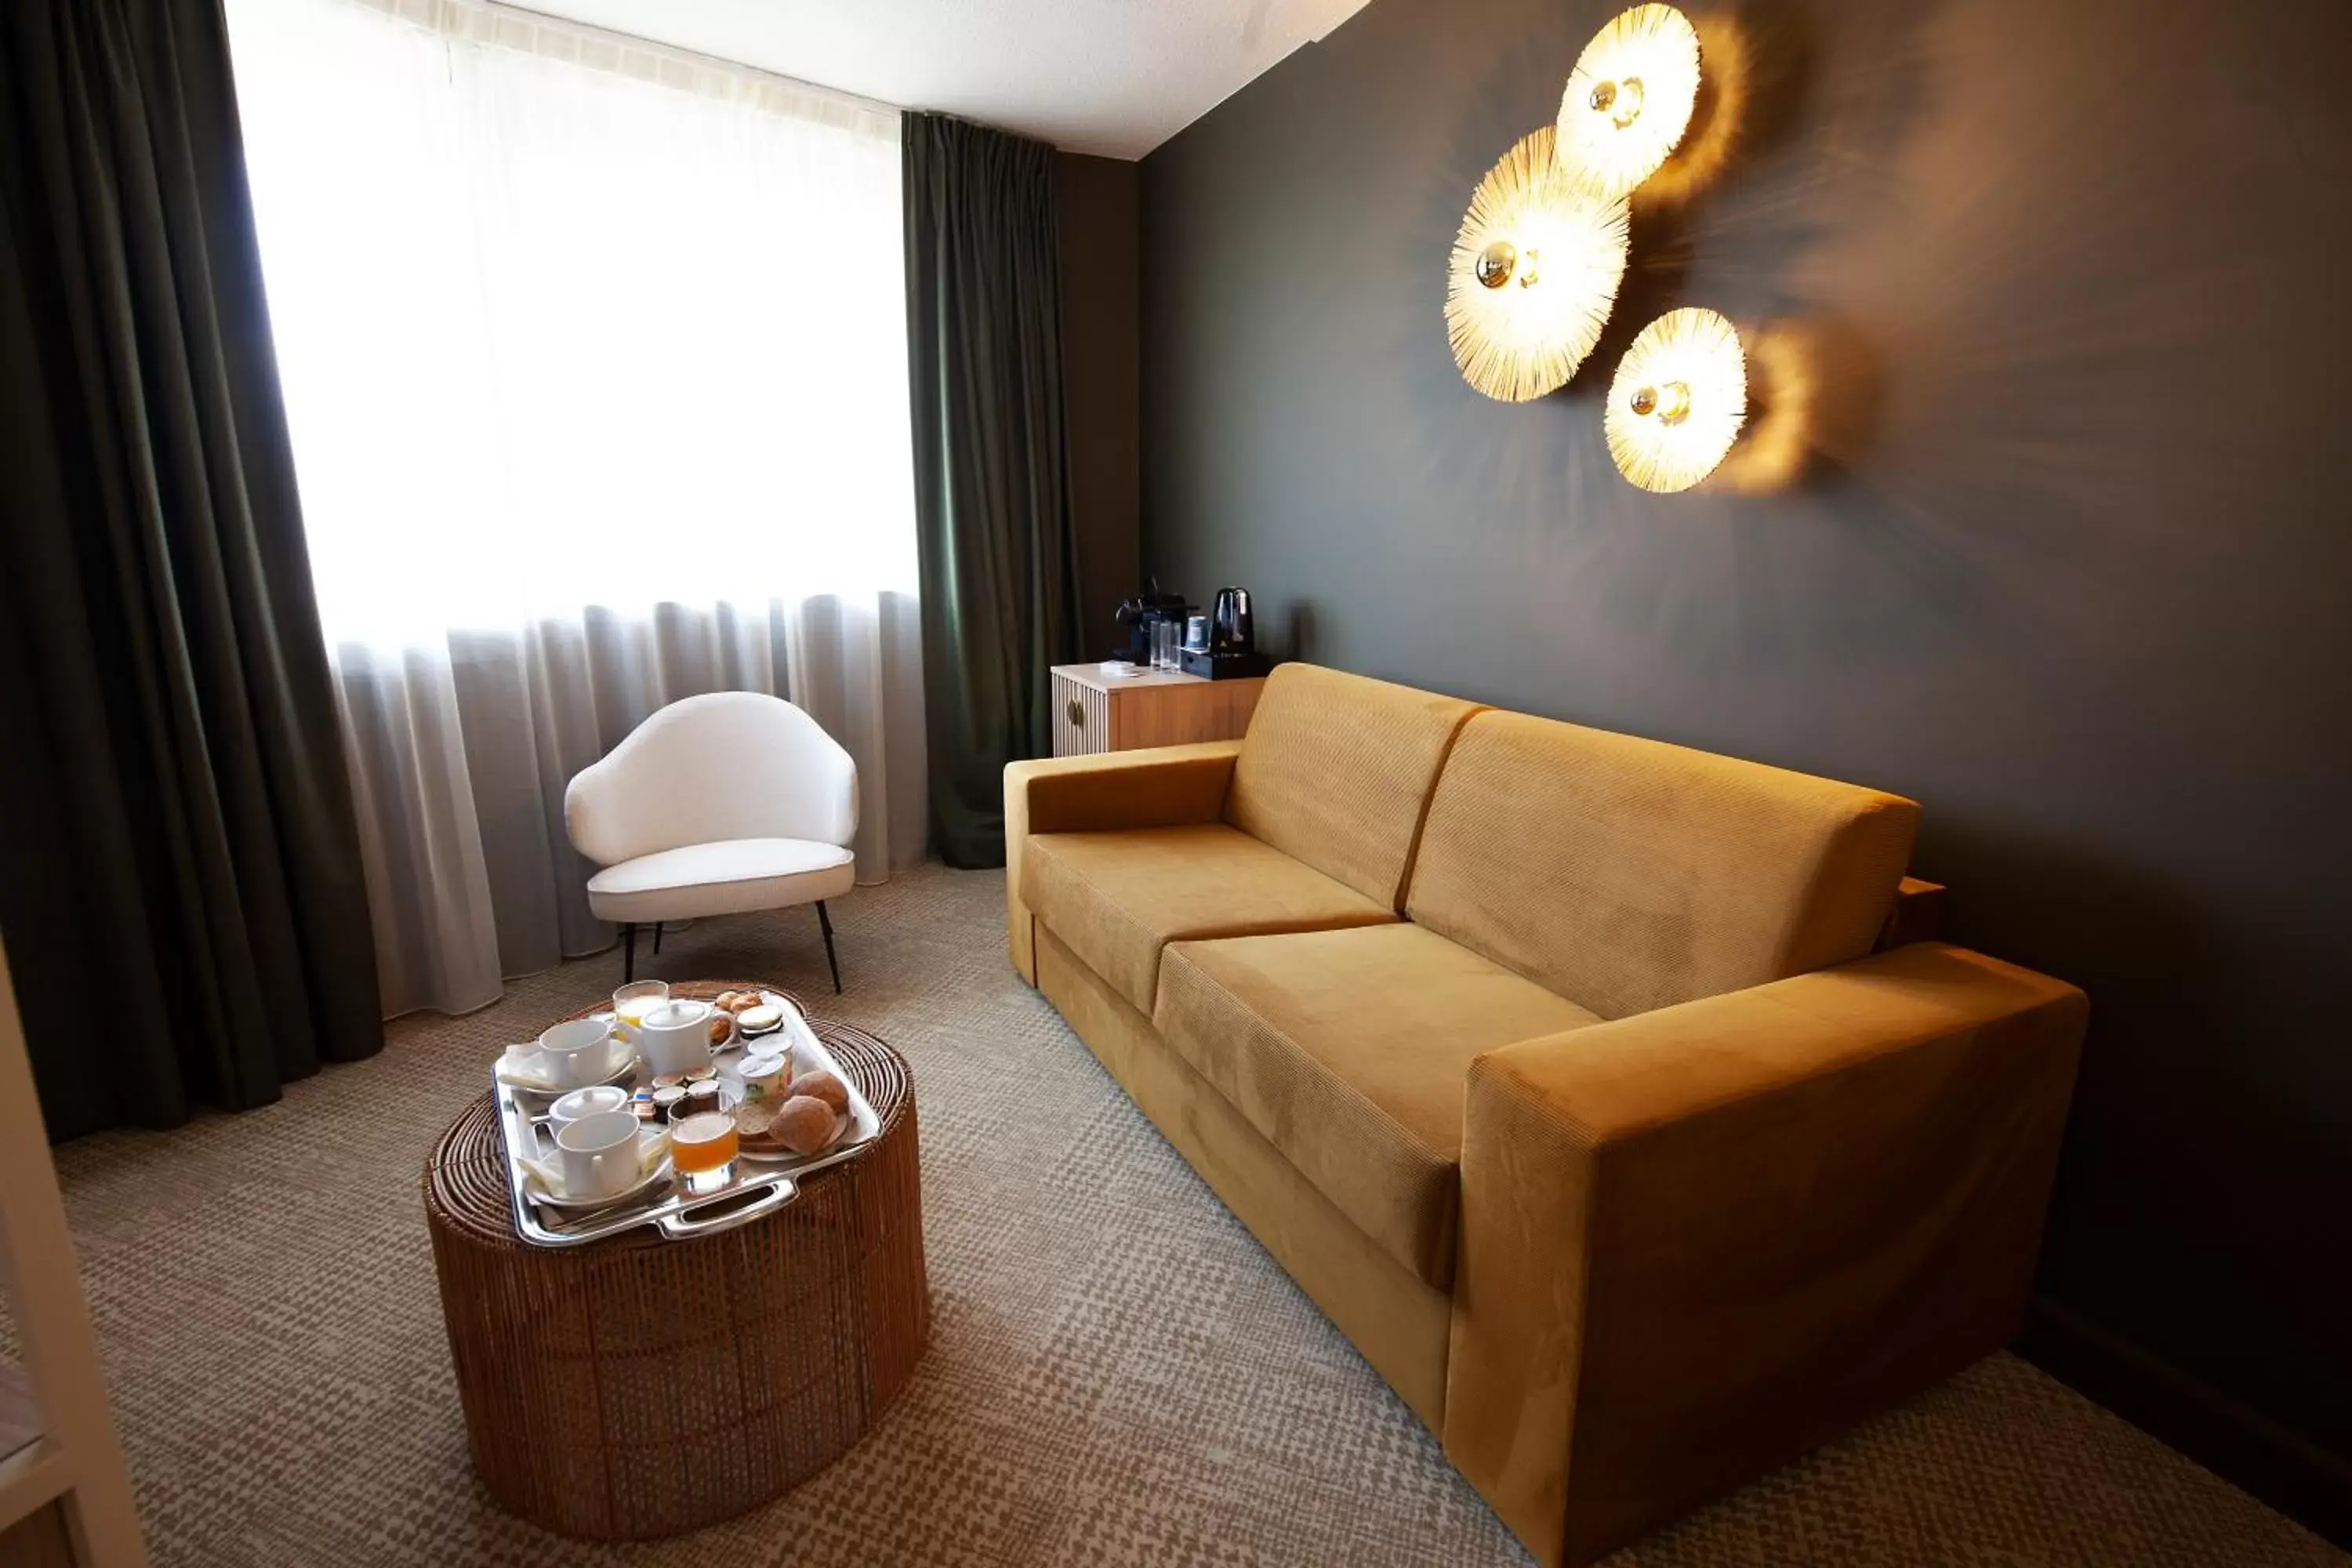 Property building, Seating Area in Kyriad Prestige Hotel Clermont-Ferrand